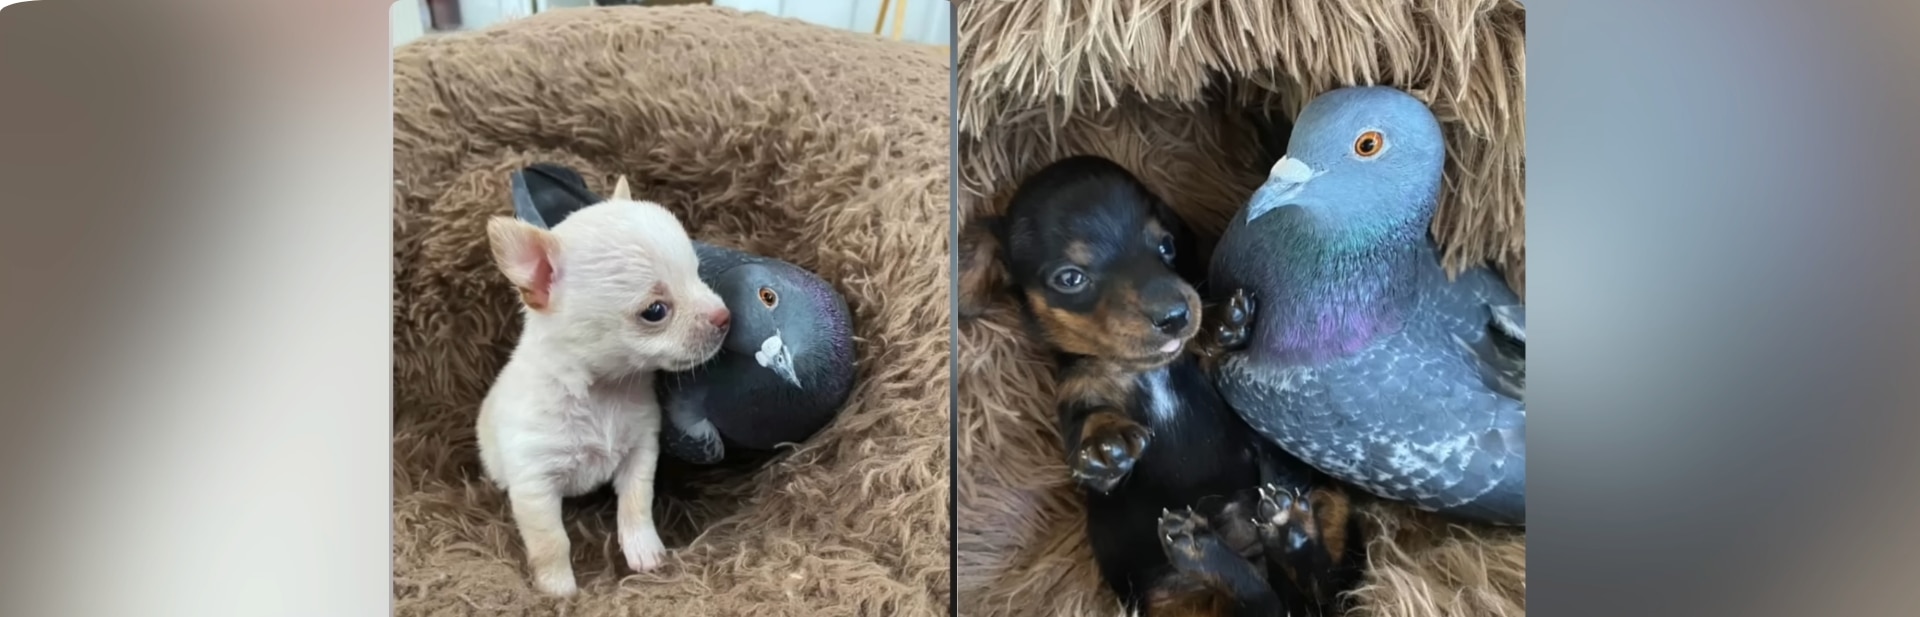 Flightless Pigeon Finds Unexpected Family in a Pack of Loving Dogs